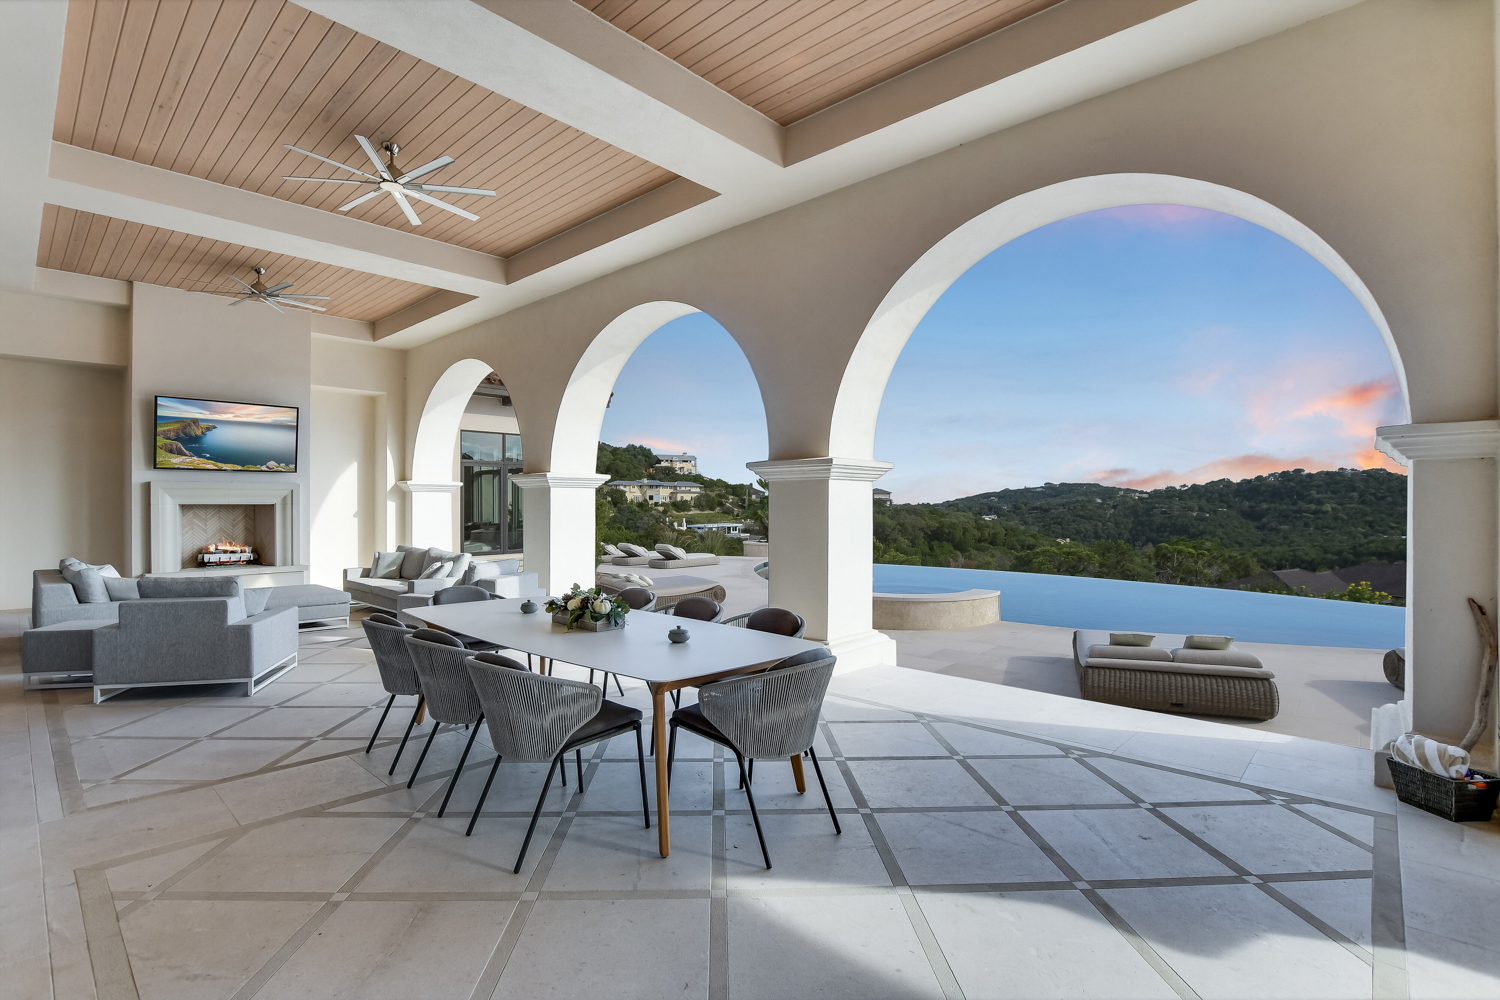 Jauregui Architect patio with arches and pool at sun set